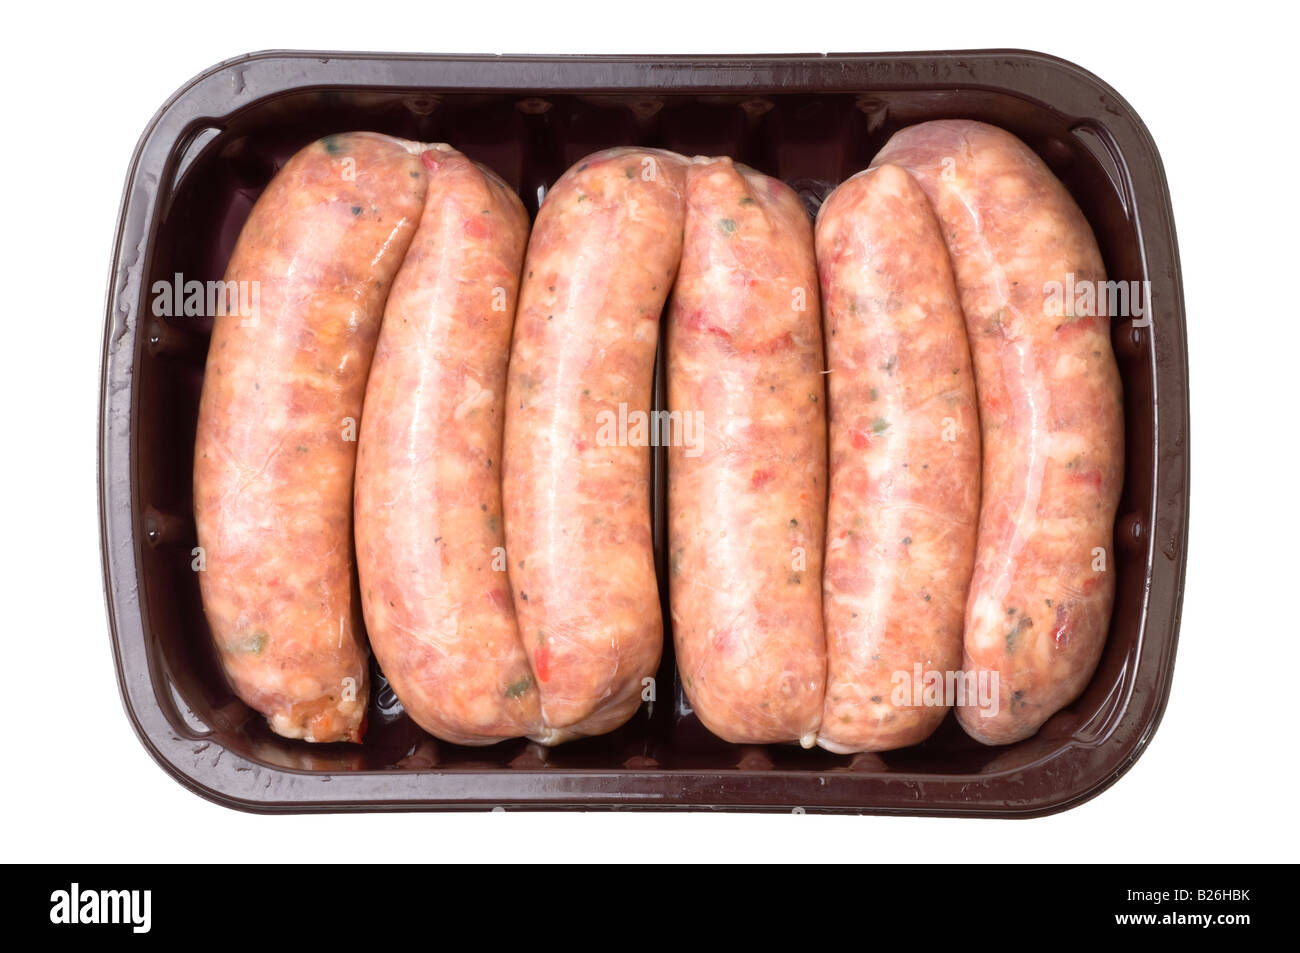 6 British pork jalapeno chilli sausages in a plastic tray Stock Photo